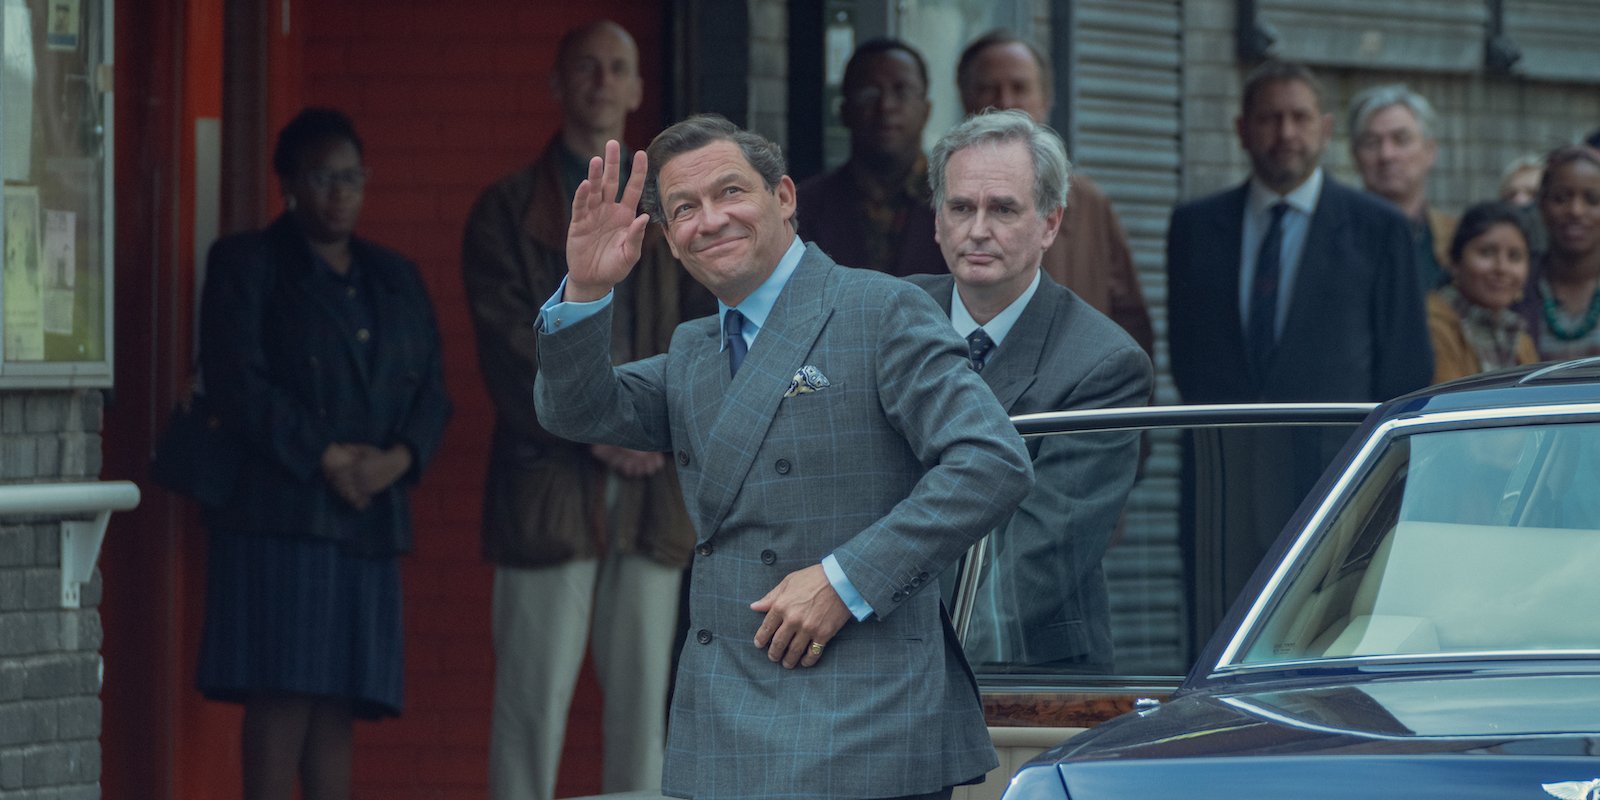 'The Crown' Season 5: Prince Charles (Dominic West) waves as he exits a car